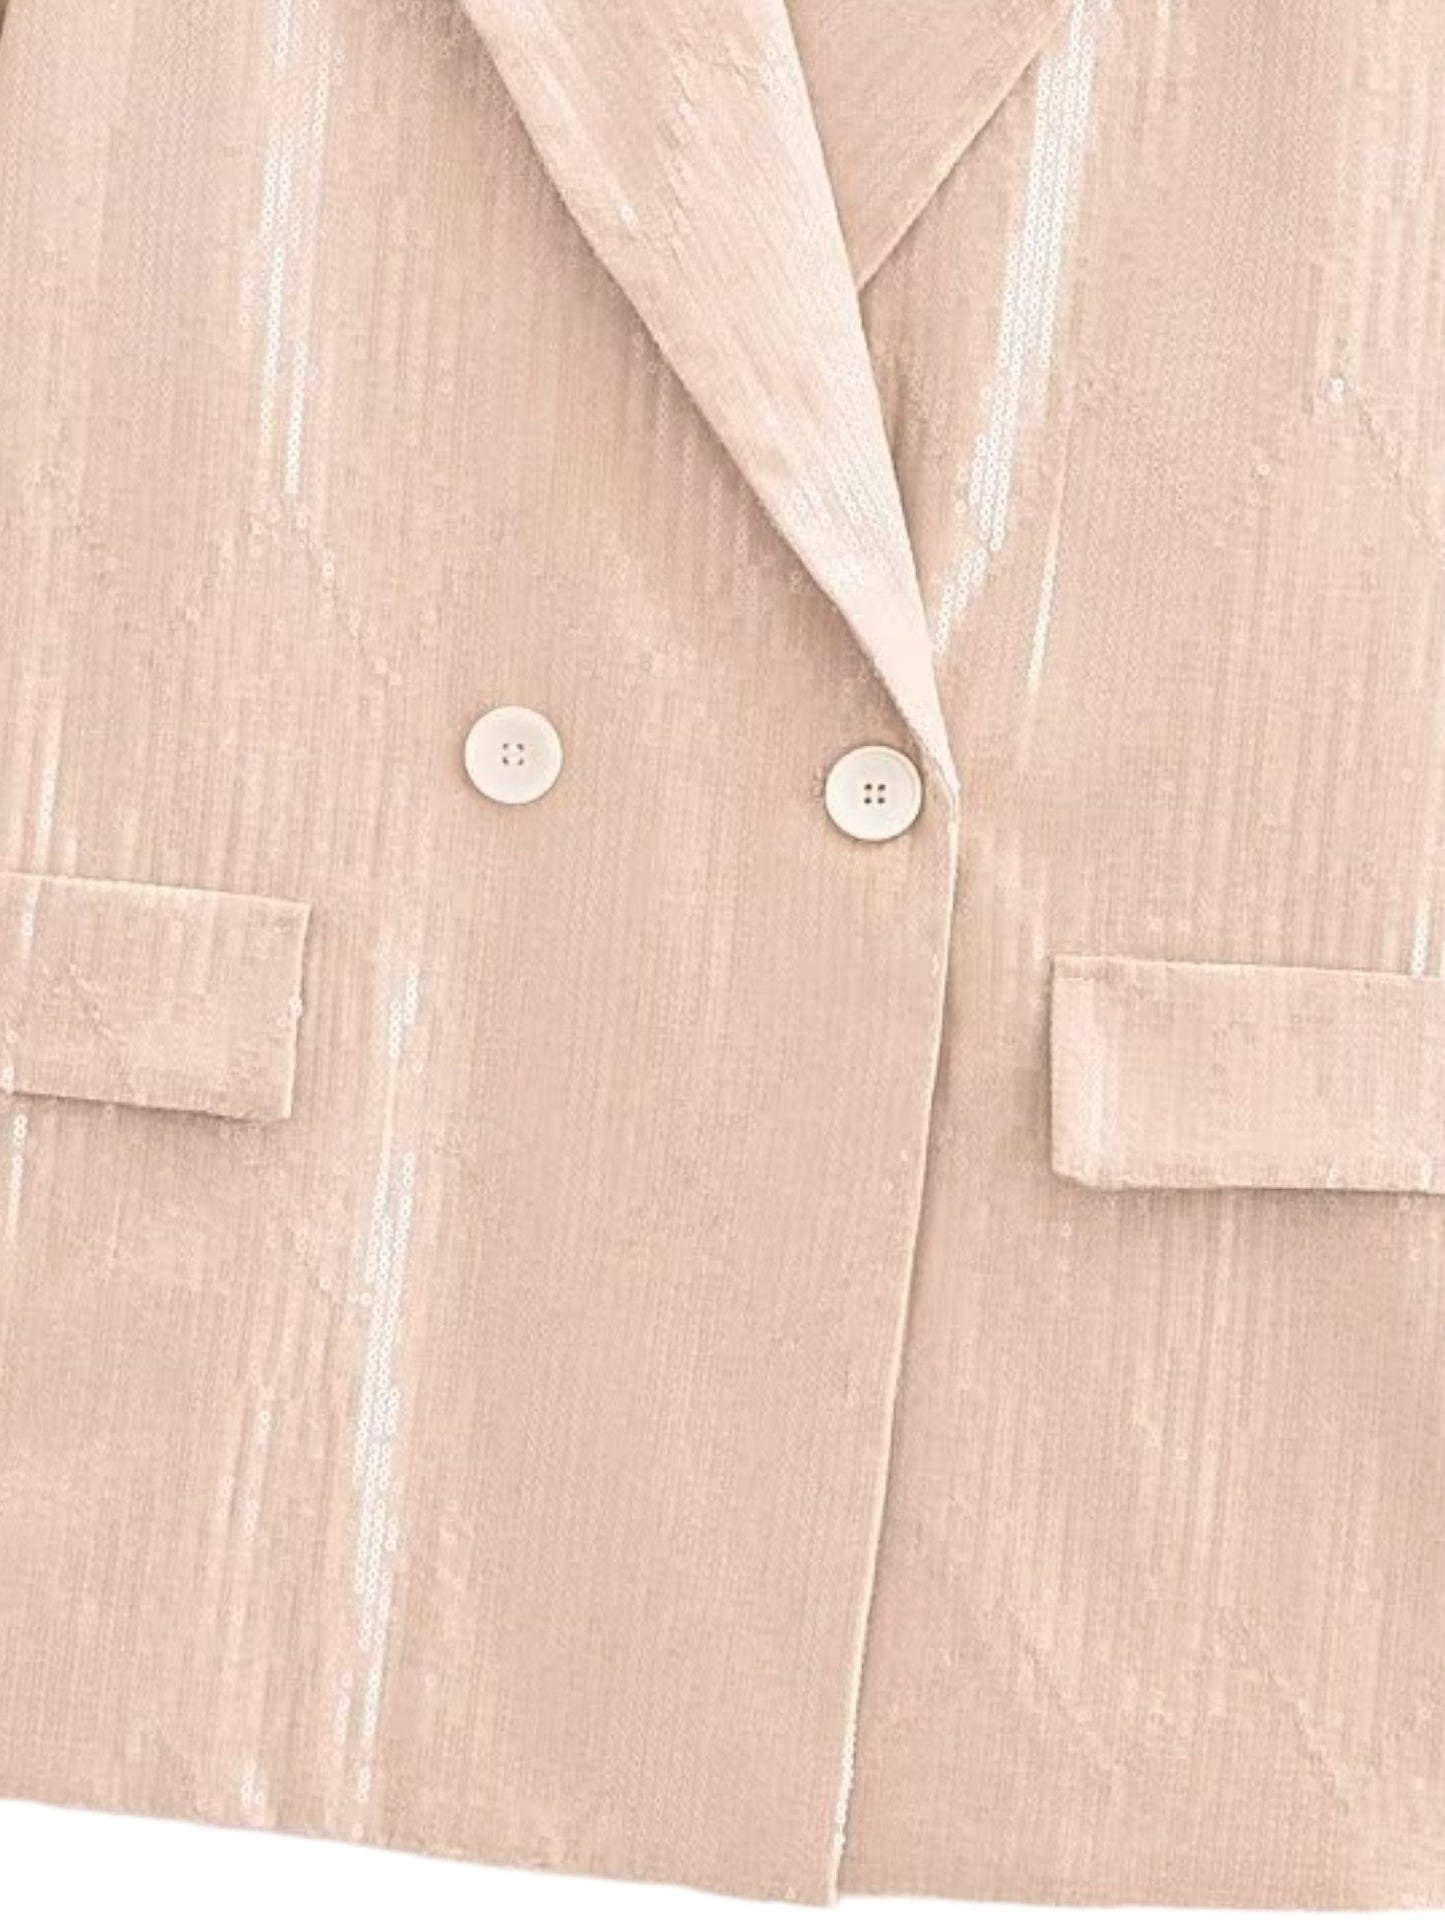 Blush Pink Sequin Tailored Notched Collar Jacket